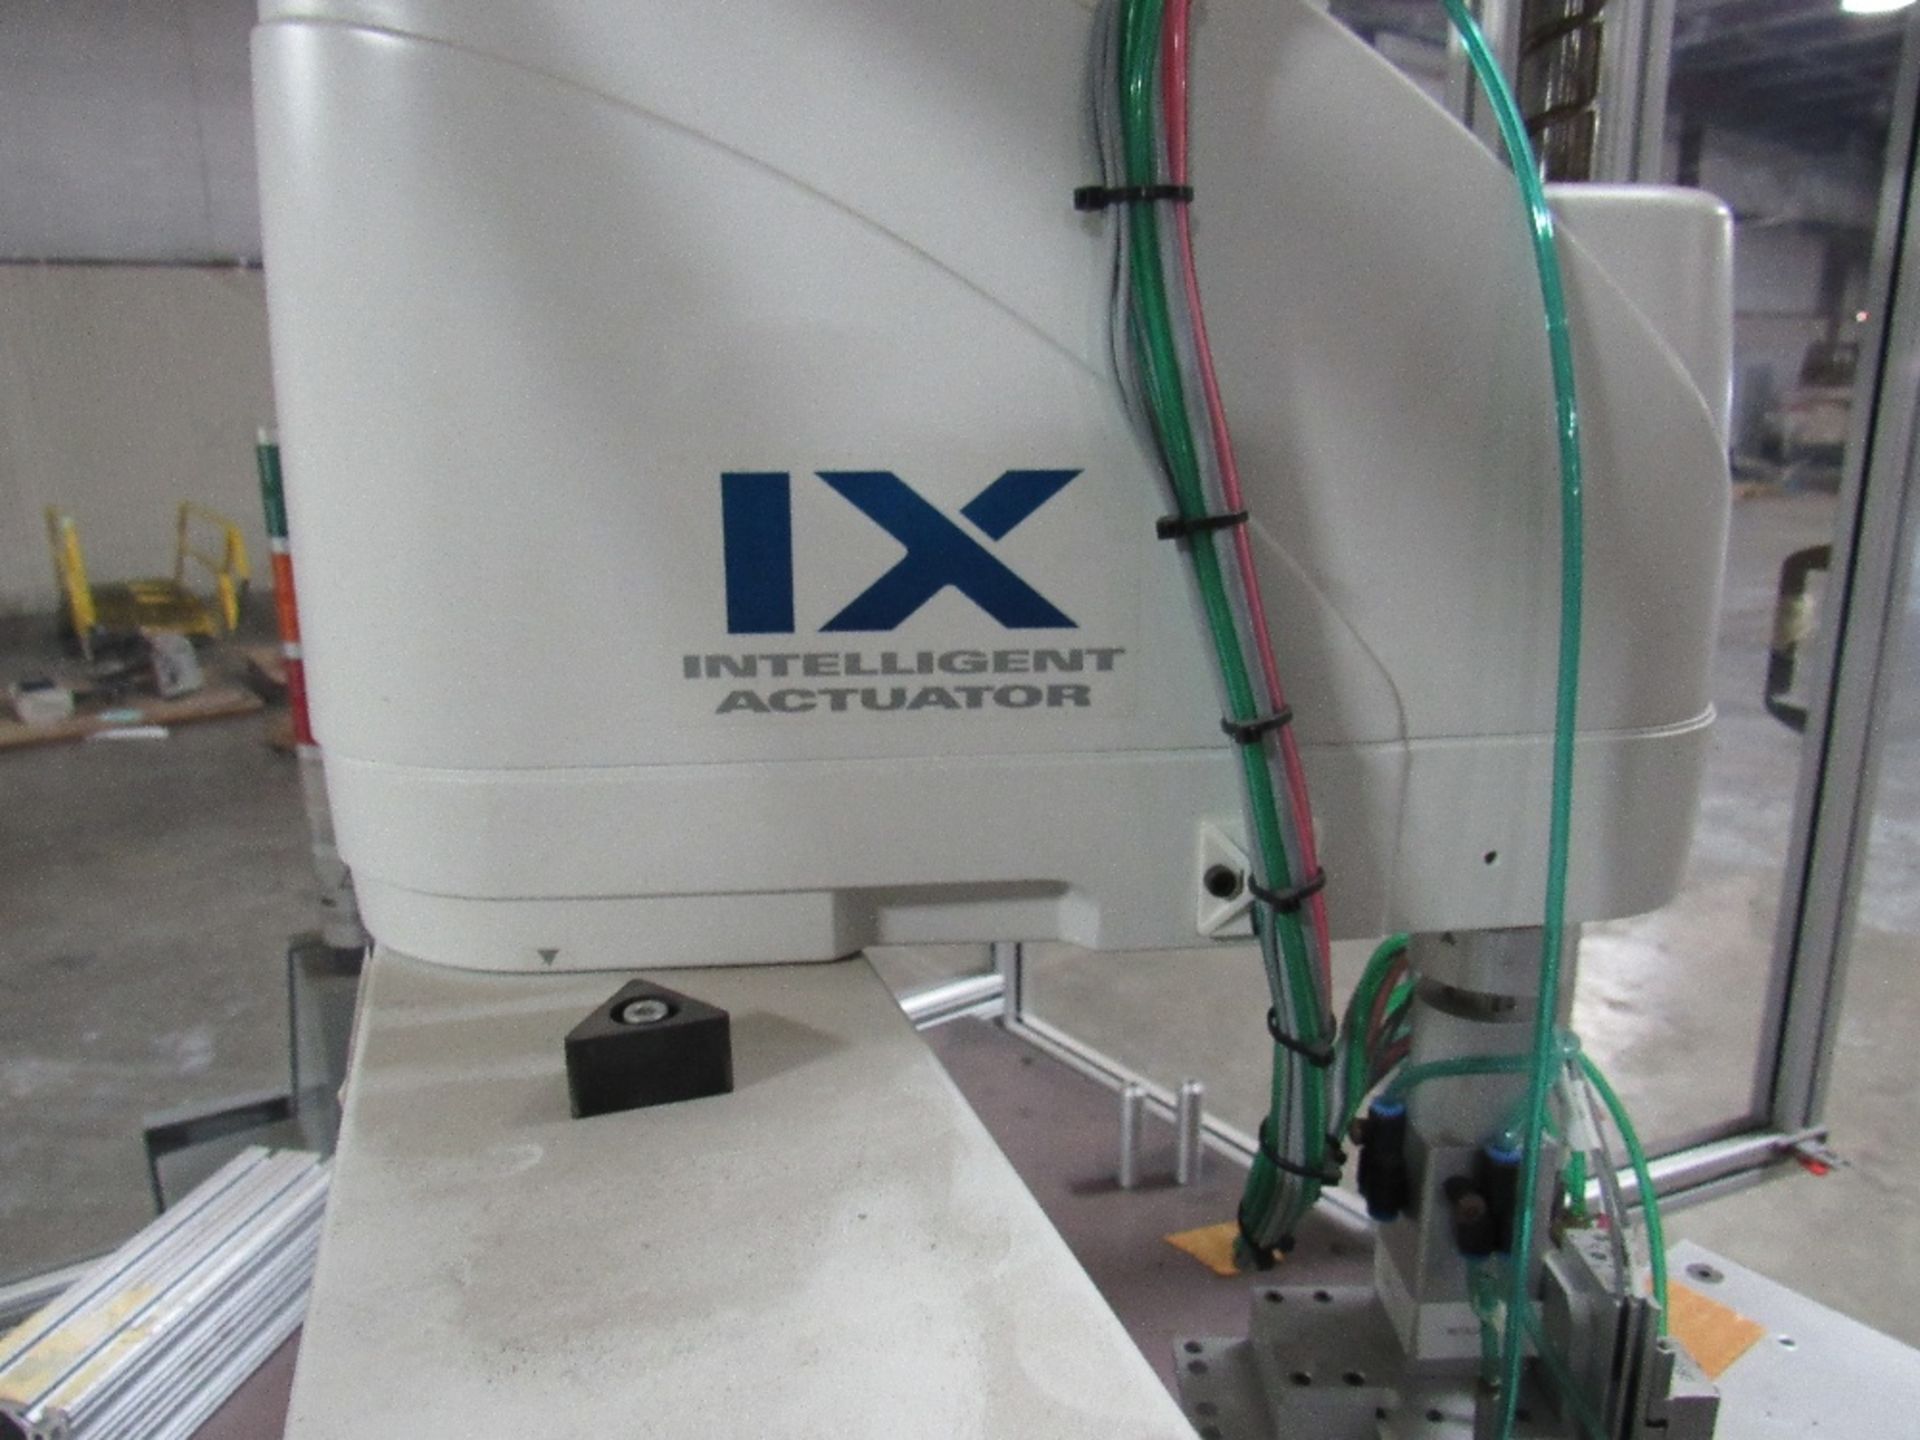 IX Intelligent Actuator High Speed Light Assembly Robot - operational when removed from service on - Image 9 of 20